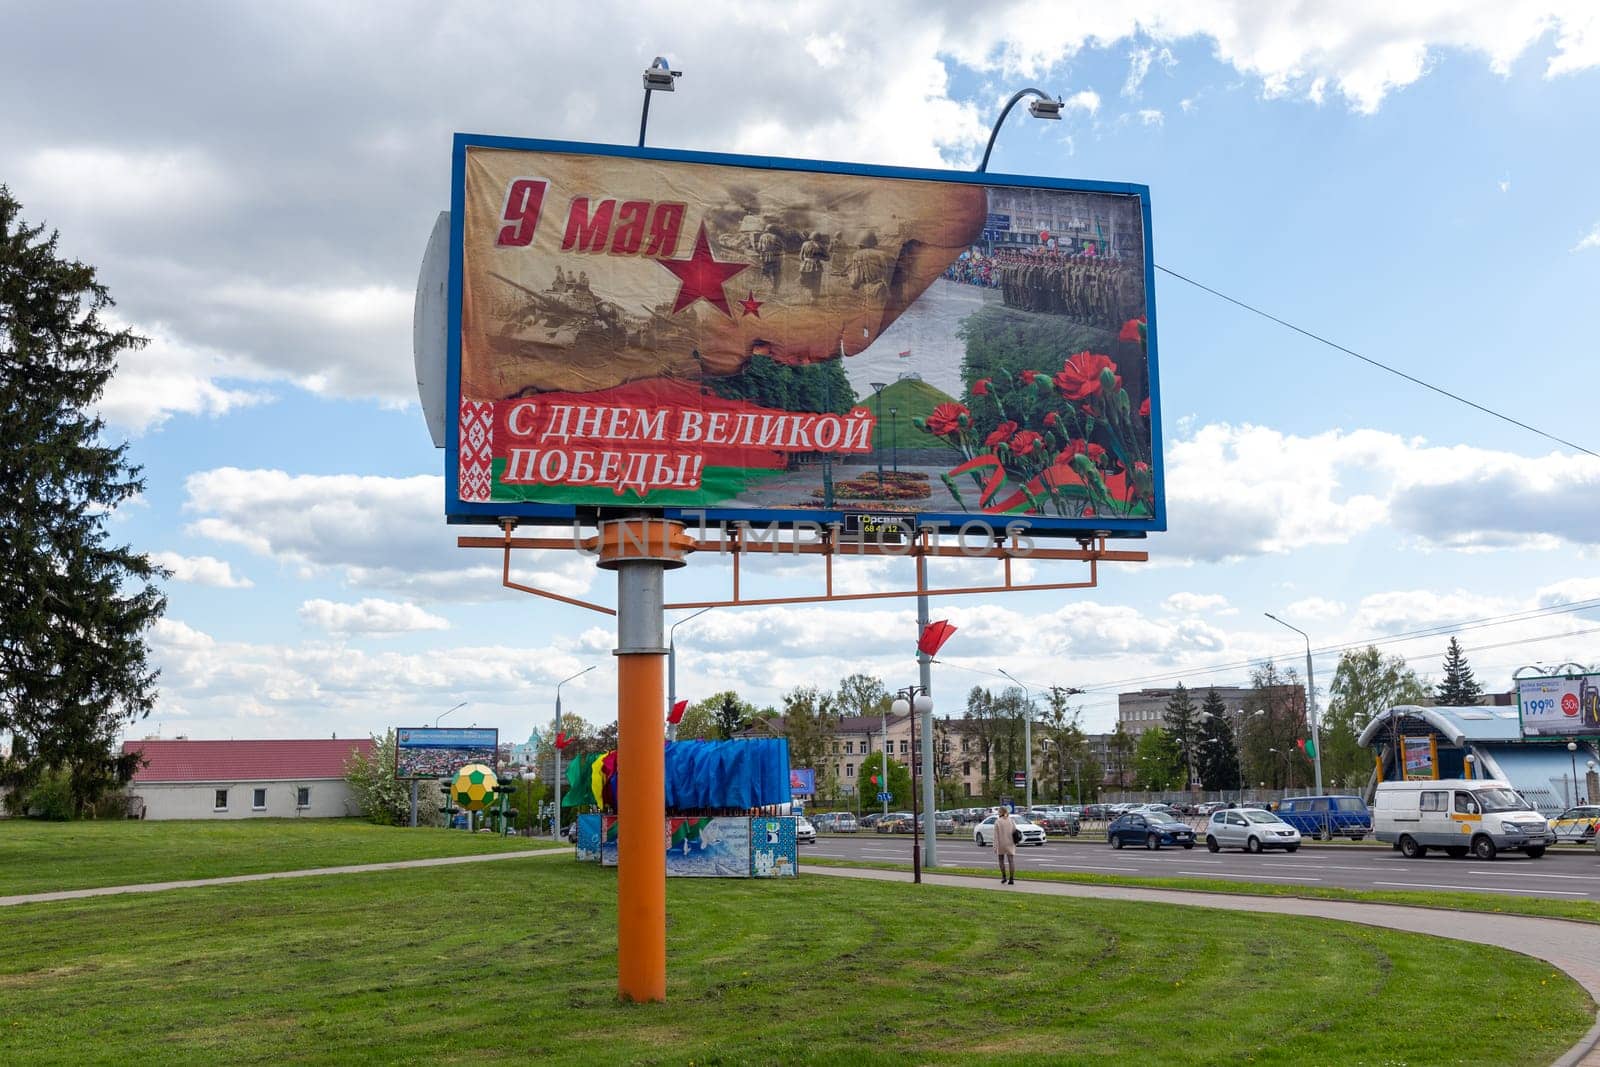 Grodno, Belarus - 24 April, 2023: A billboard with congratulations on Victory Day on May 9 which includes images of carnations, the Mound of Glory, the victory parade, military operations